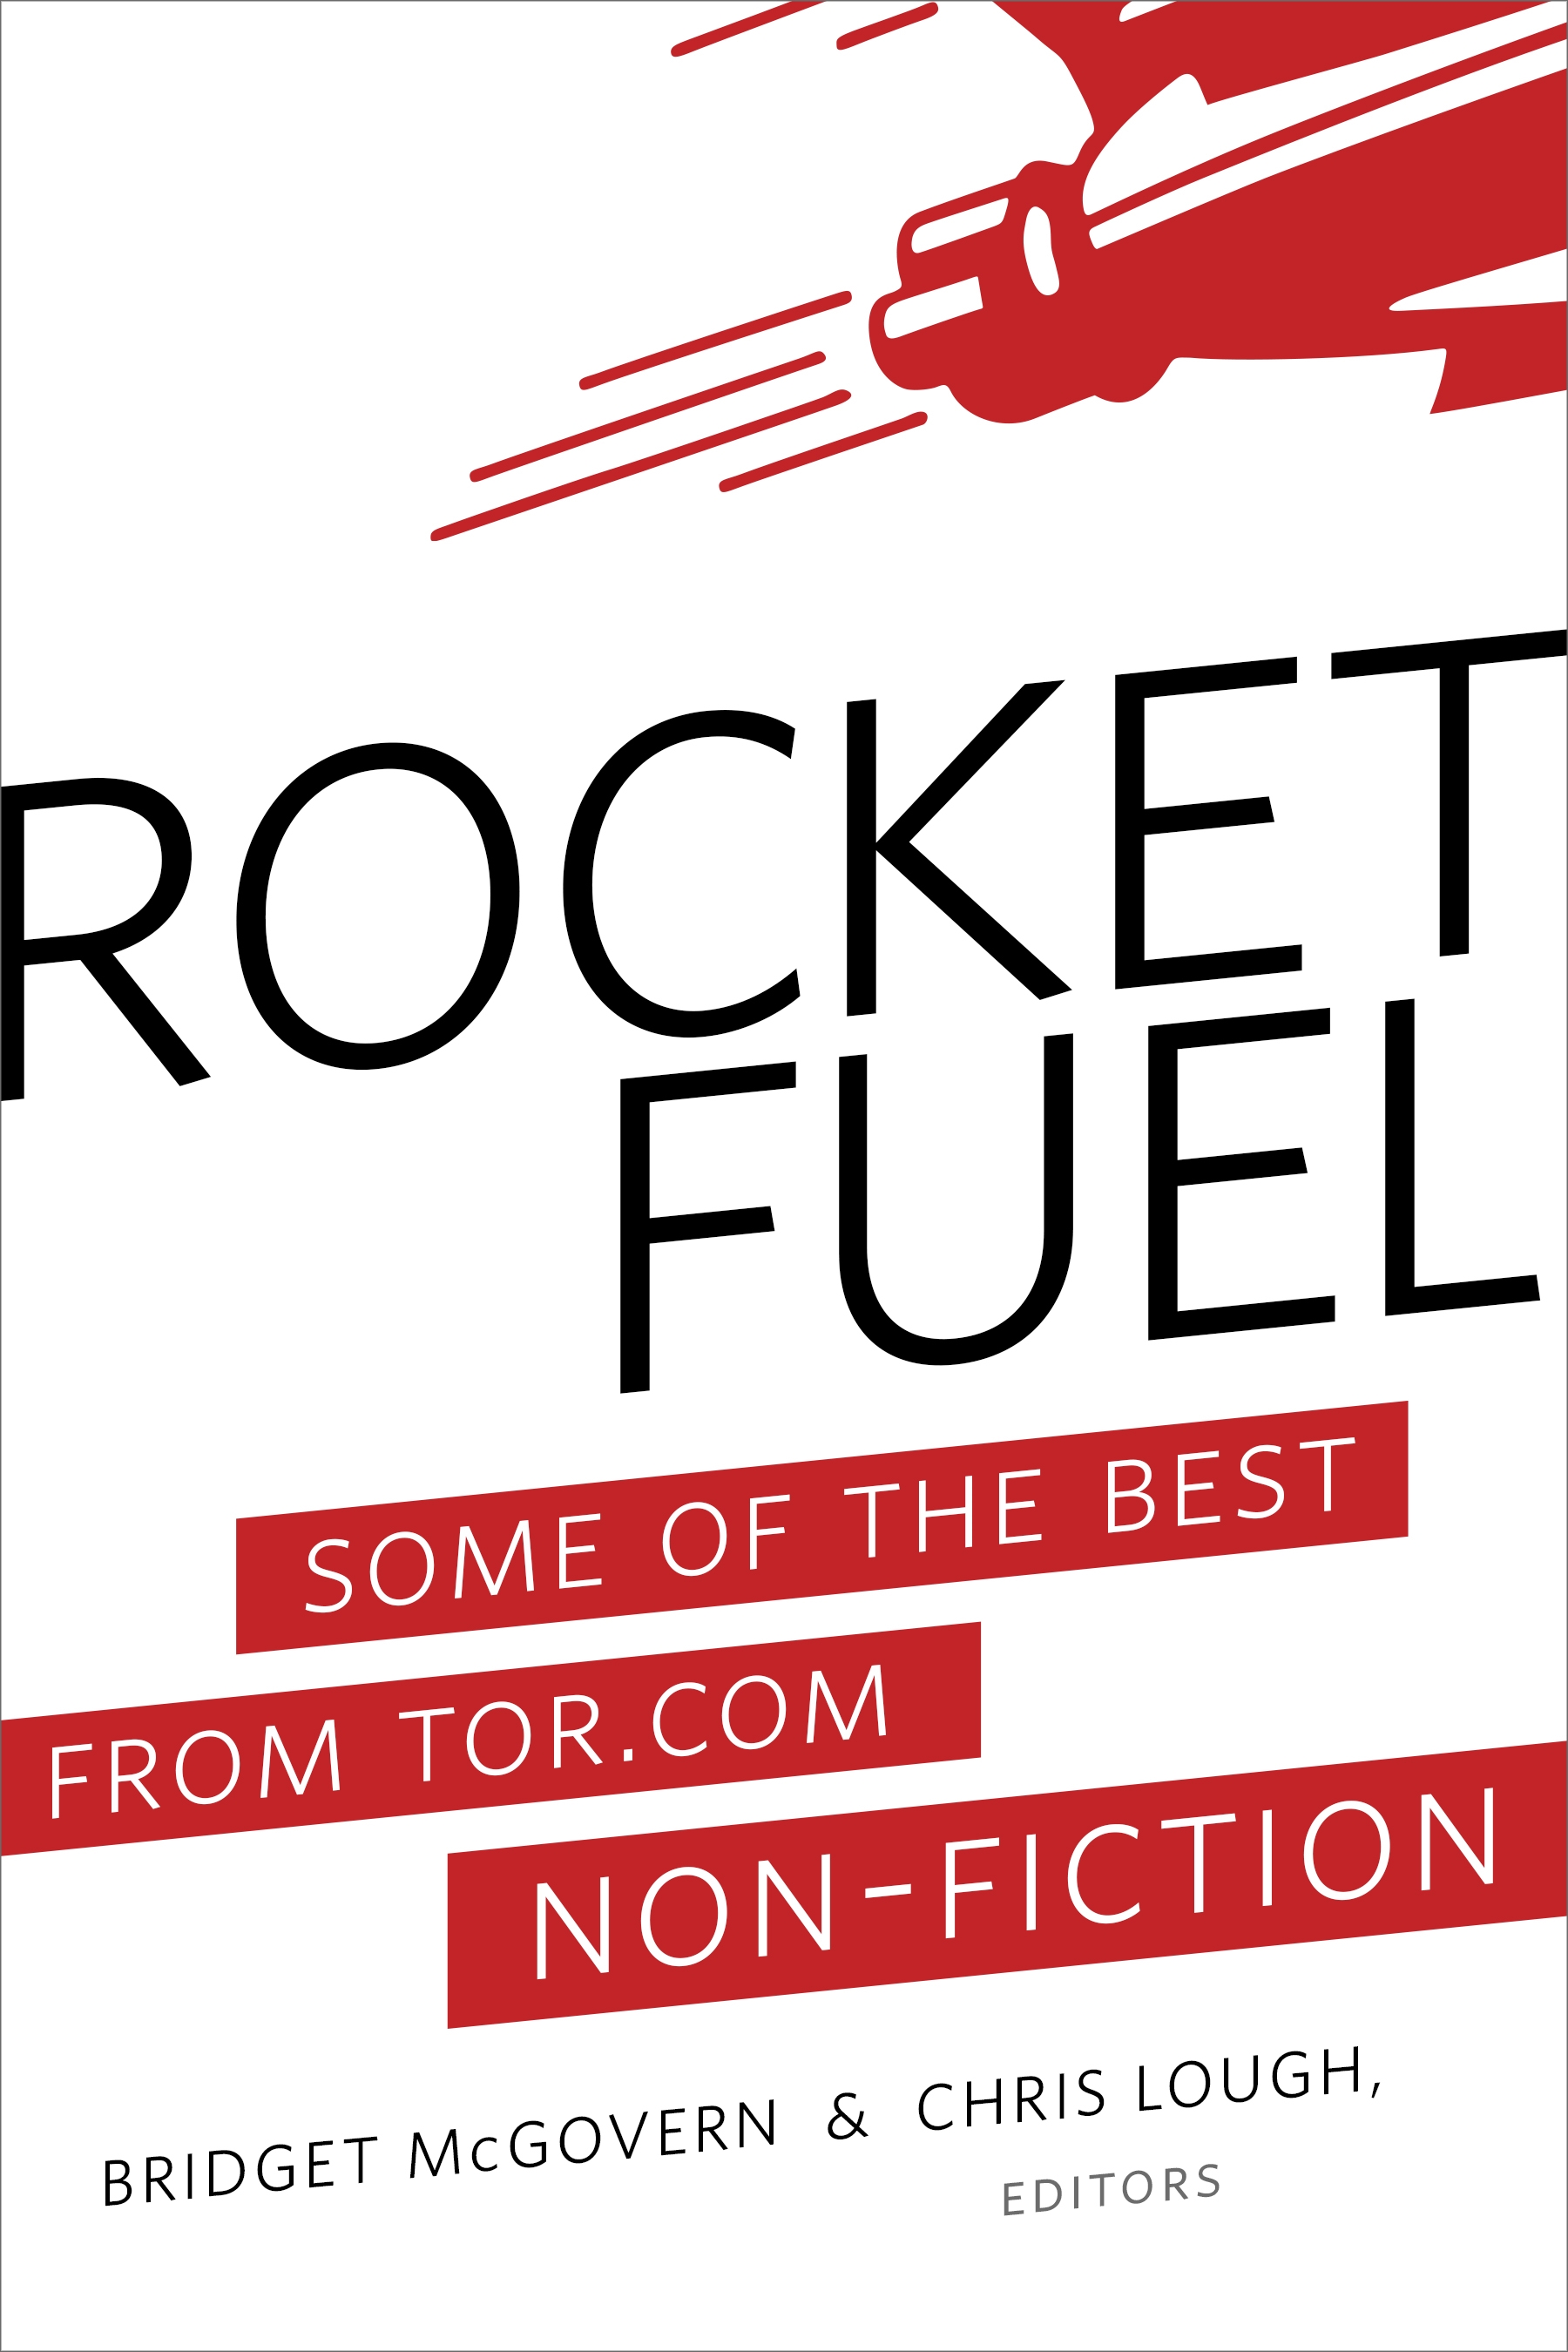 Rocket Fuel : Some of the Best From Tor.com Non-Fiction by Bridget McGovern, Chris Lough